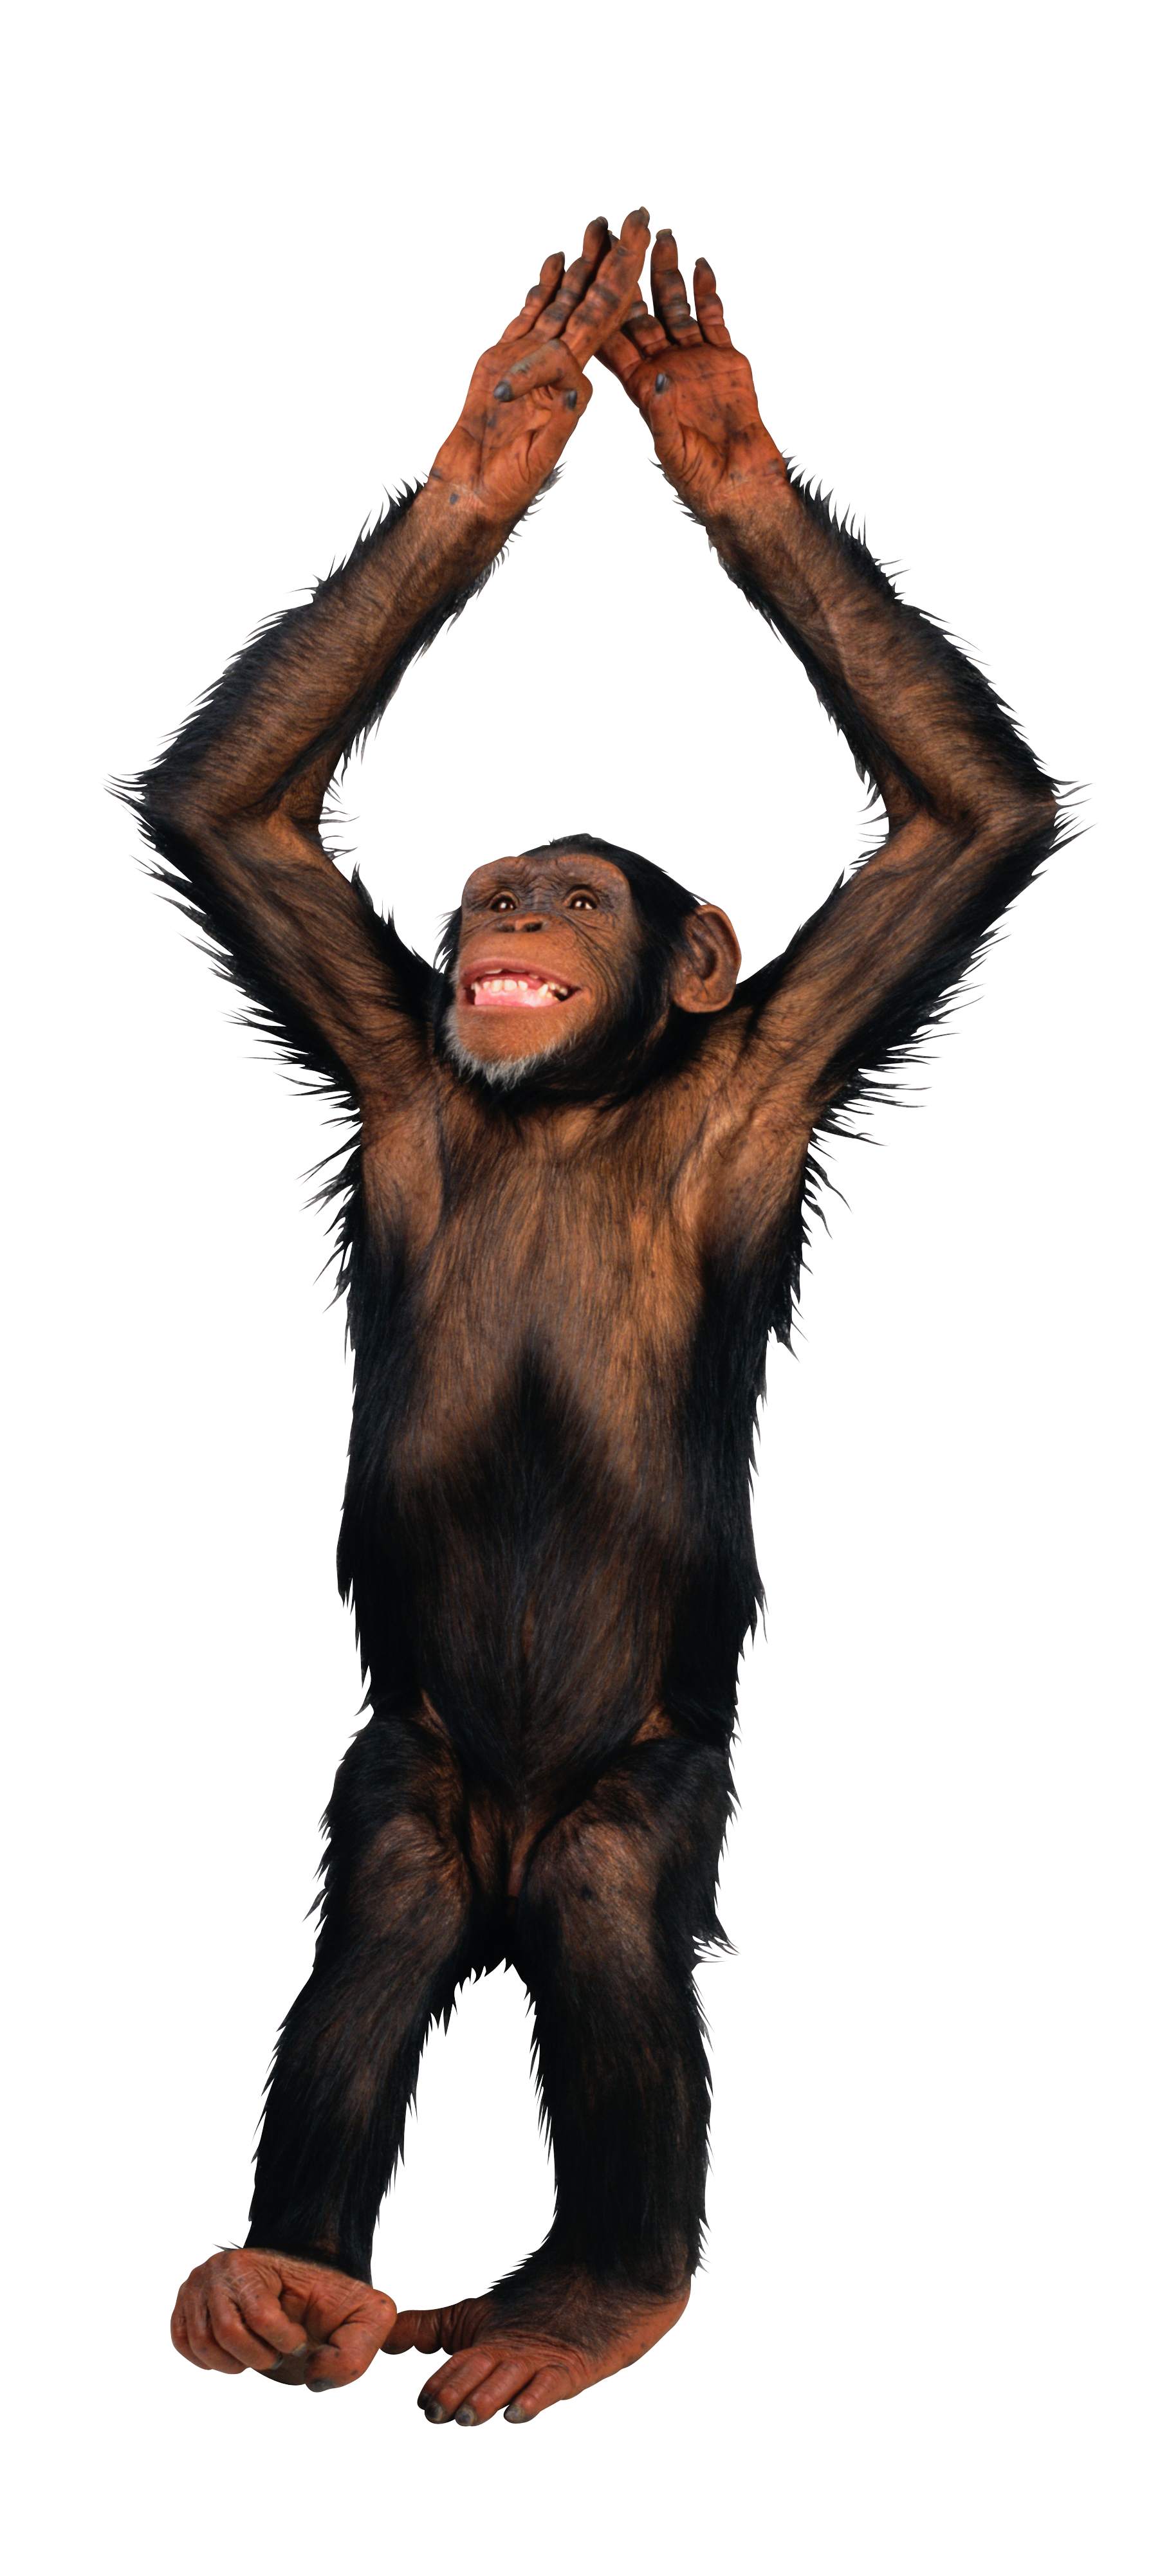 Real Monkey Happy PNG Image in Transparent pngteam.com